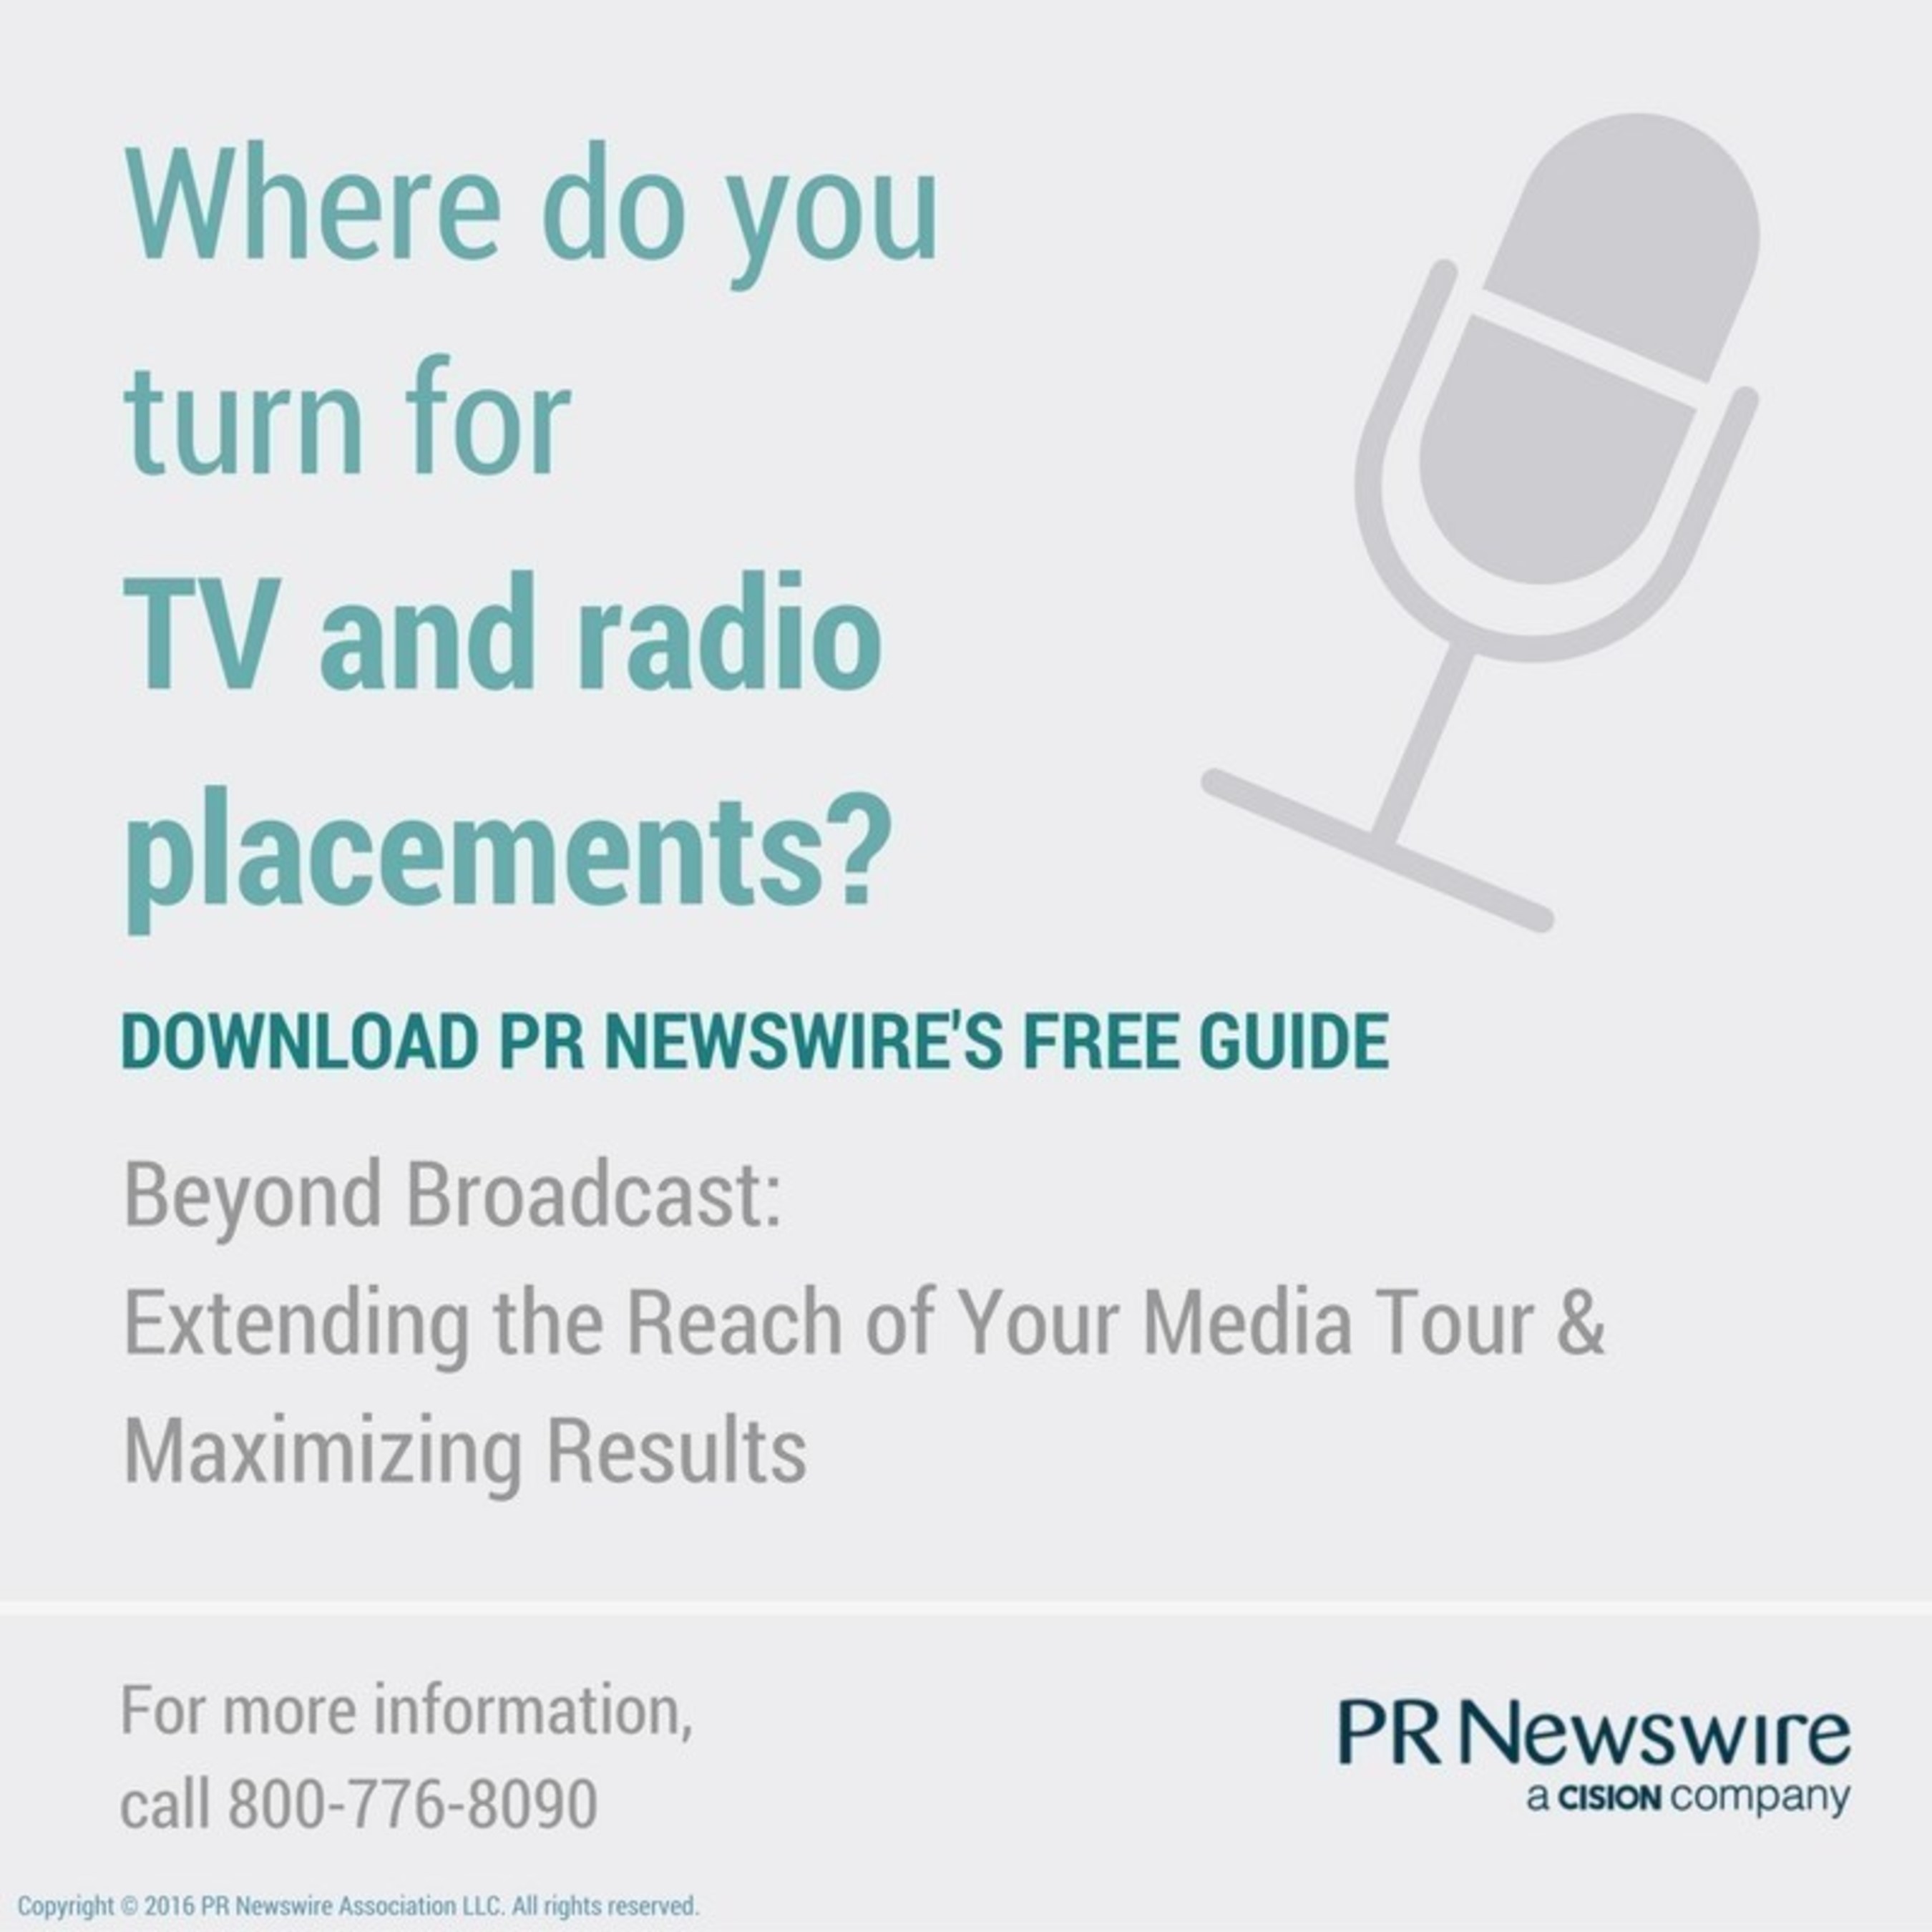 Beyond Broadcast: Extending the Reach of Your Media Tour & Maximizing Results:  http://prn.to/2bIX87d